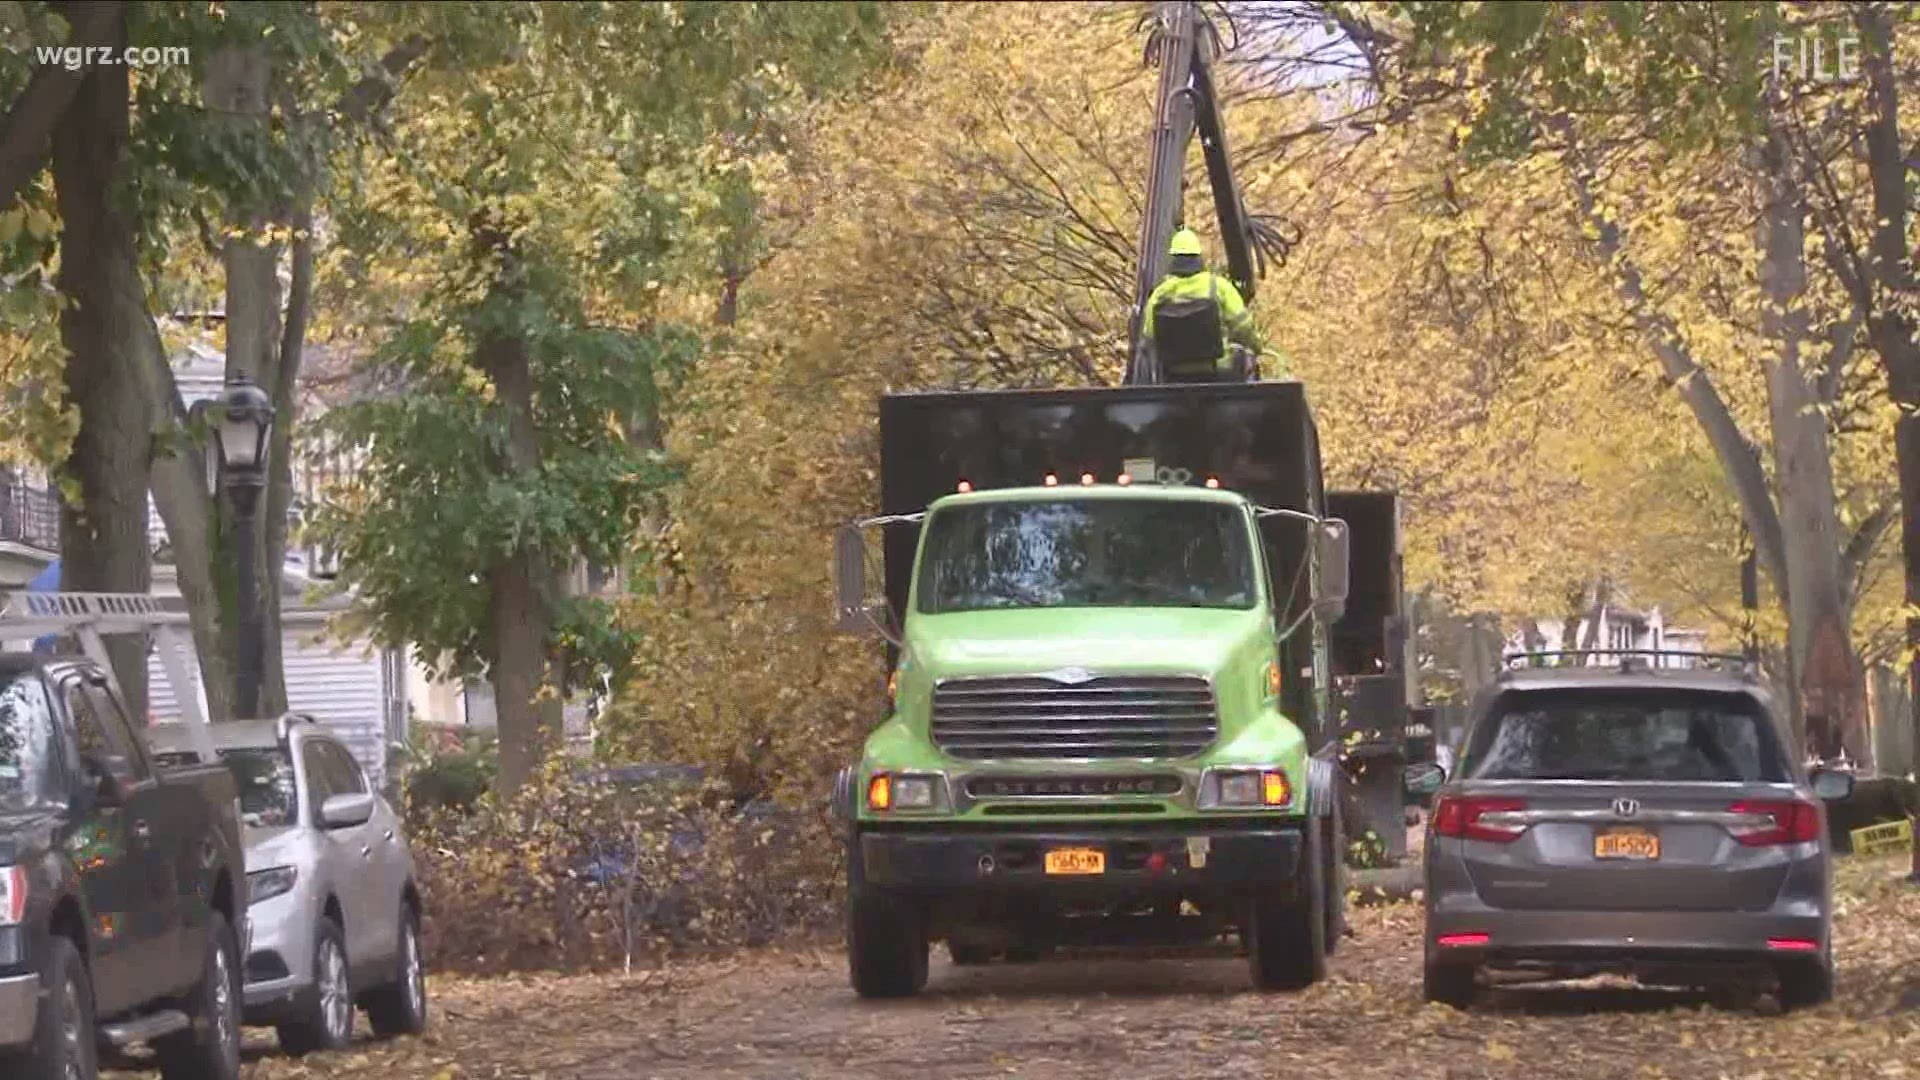 National grid, New York state and the city of Buffalo are prepping for some expected wind damage tomorrow.